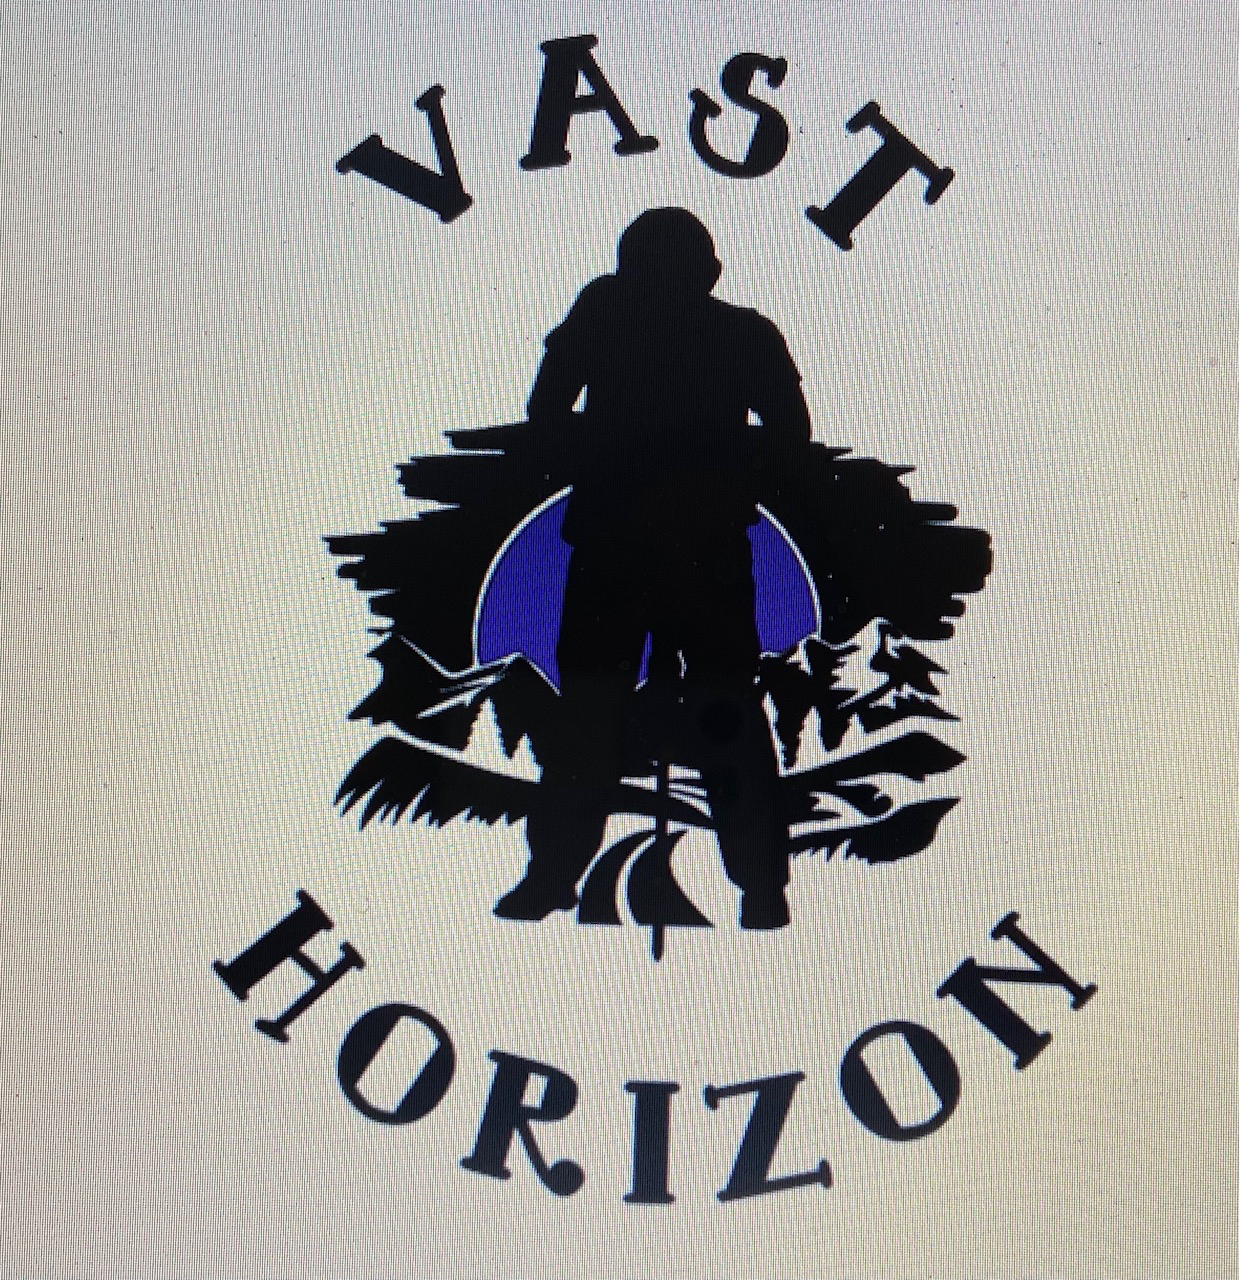 Vast Horizon Logo: A dark silhouette of a construction worker is at the front of this image. He is holding a jackhammer in his hand, bent over slightly. A long road runs behind him, winding up into a mountain range. A hazy purple moon comes up from behind the image.